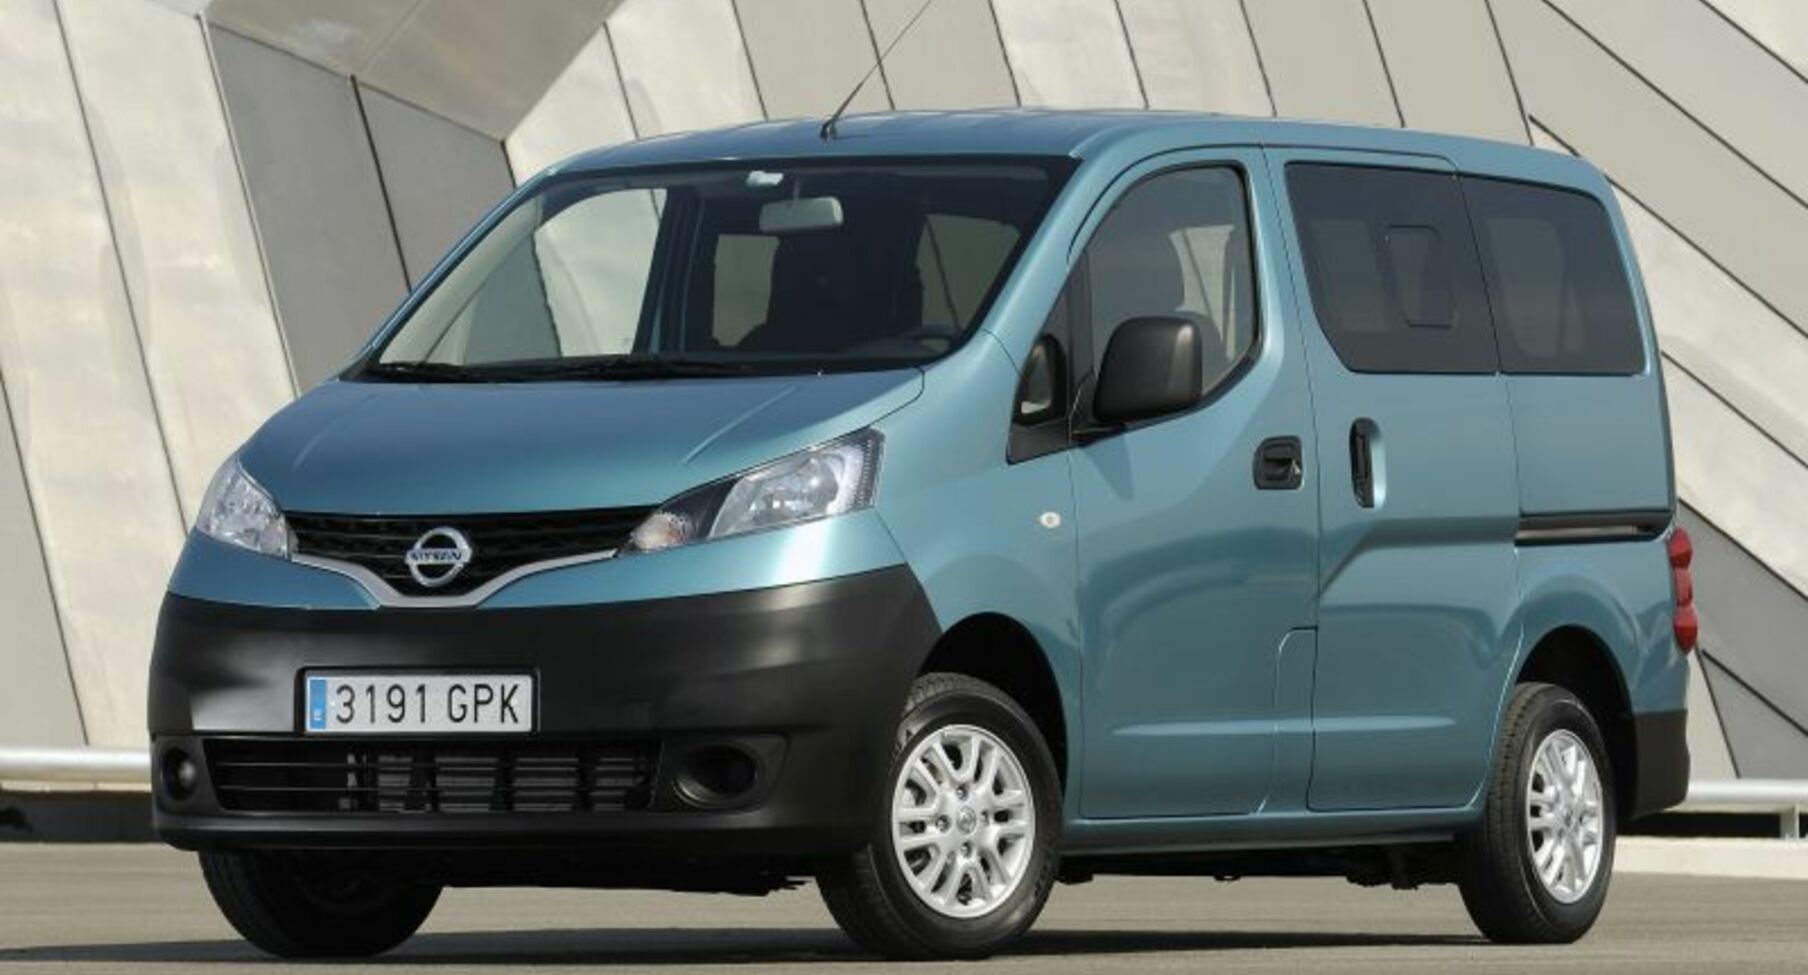 Nissan NV200 Combi 1.5 dCi (110 Hp) 2012, 2013, 2014, 2015, 2016, 2017,  2018, 2019, 2020, 2021 specifications, prices & reviews